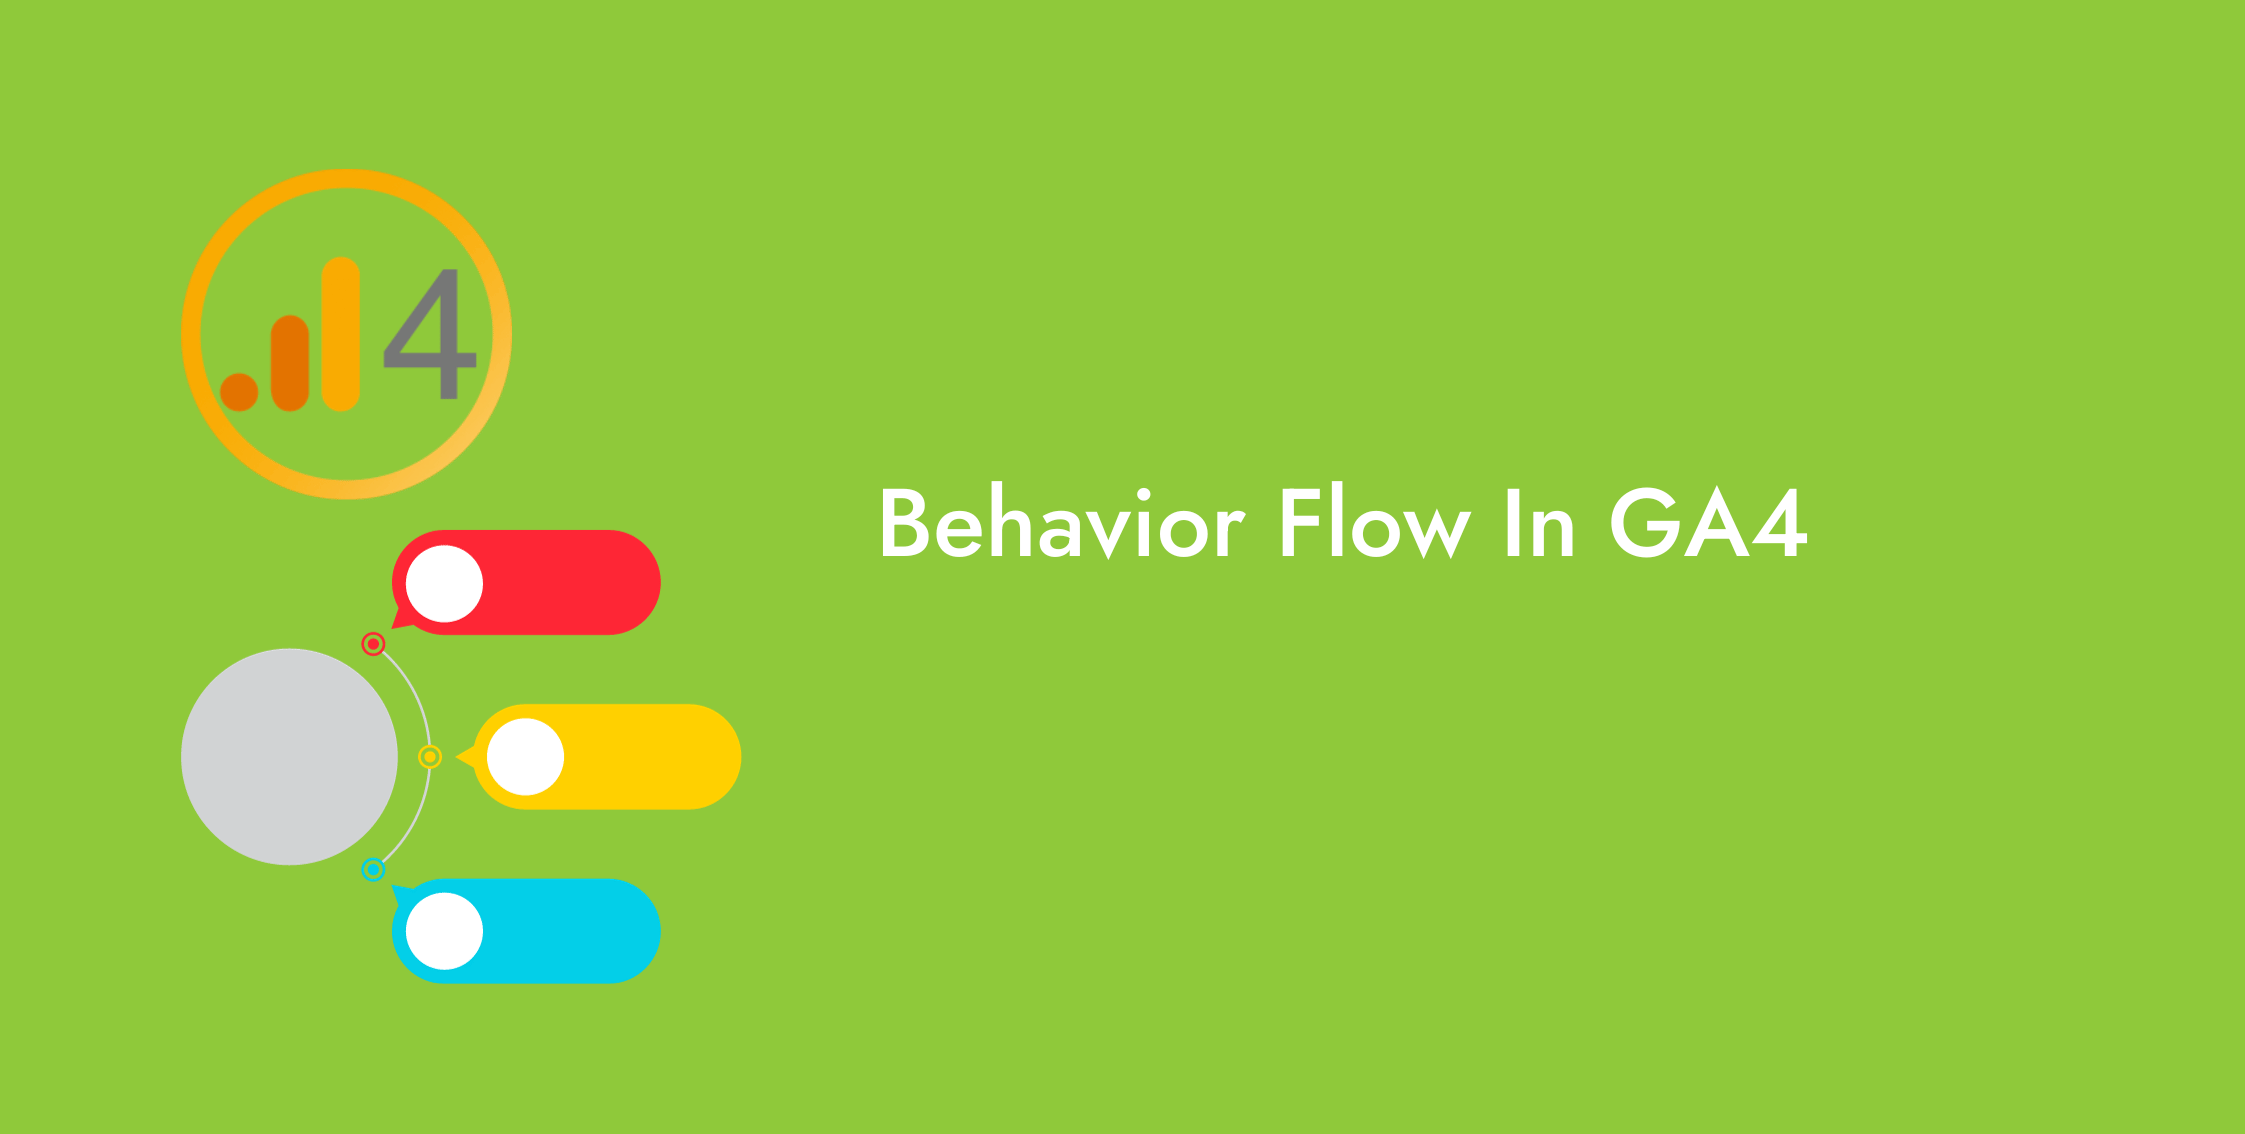 How To Find And Analyze Behavior Flow Report In GA4?